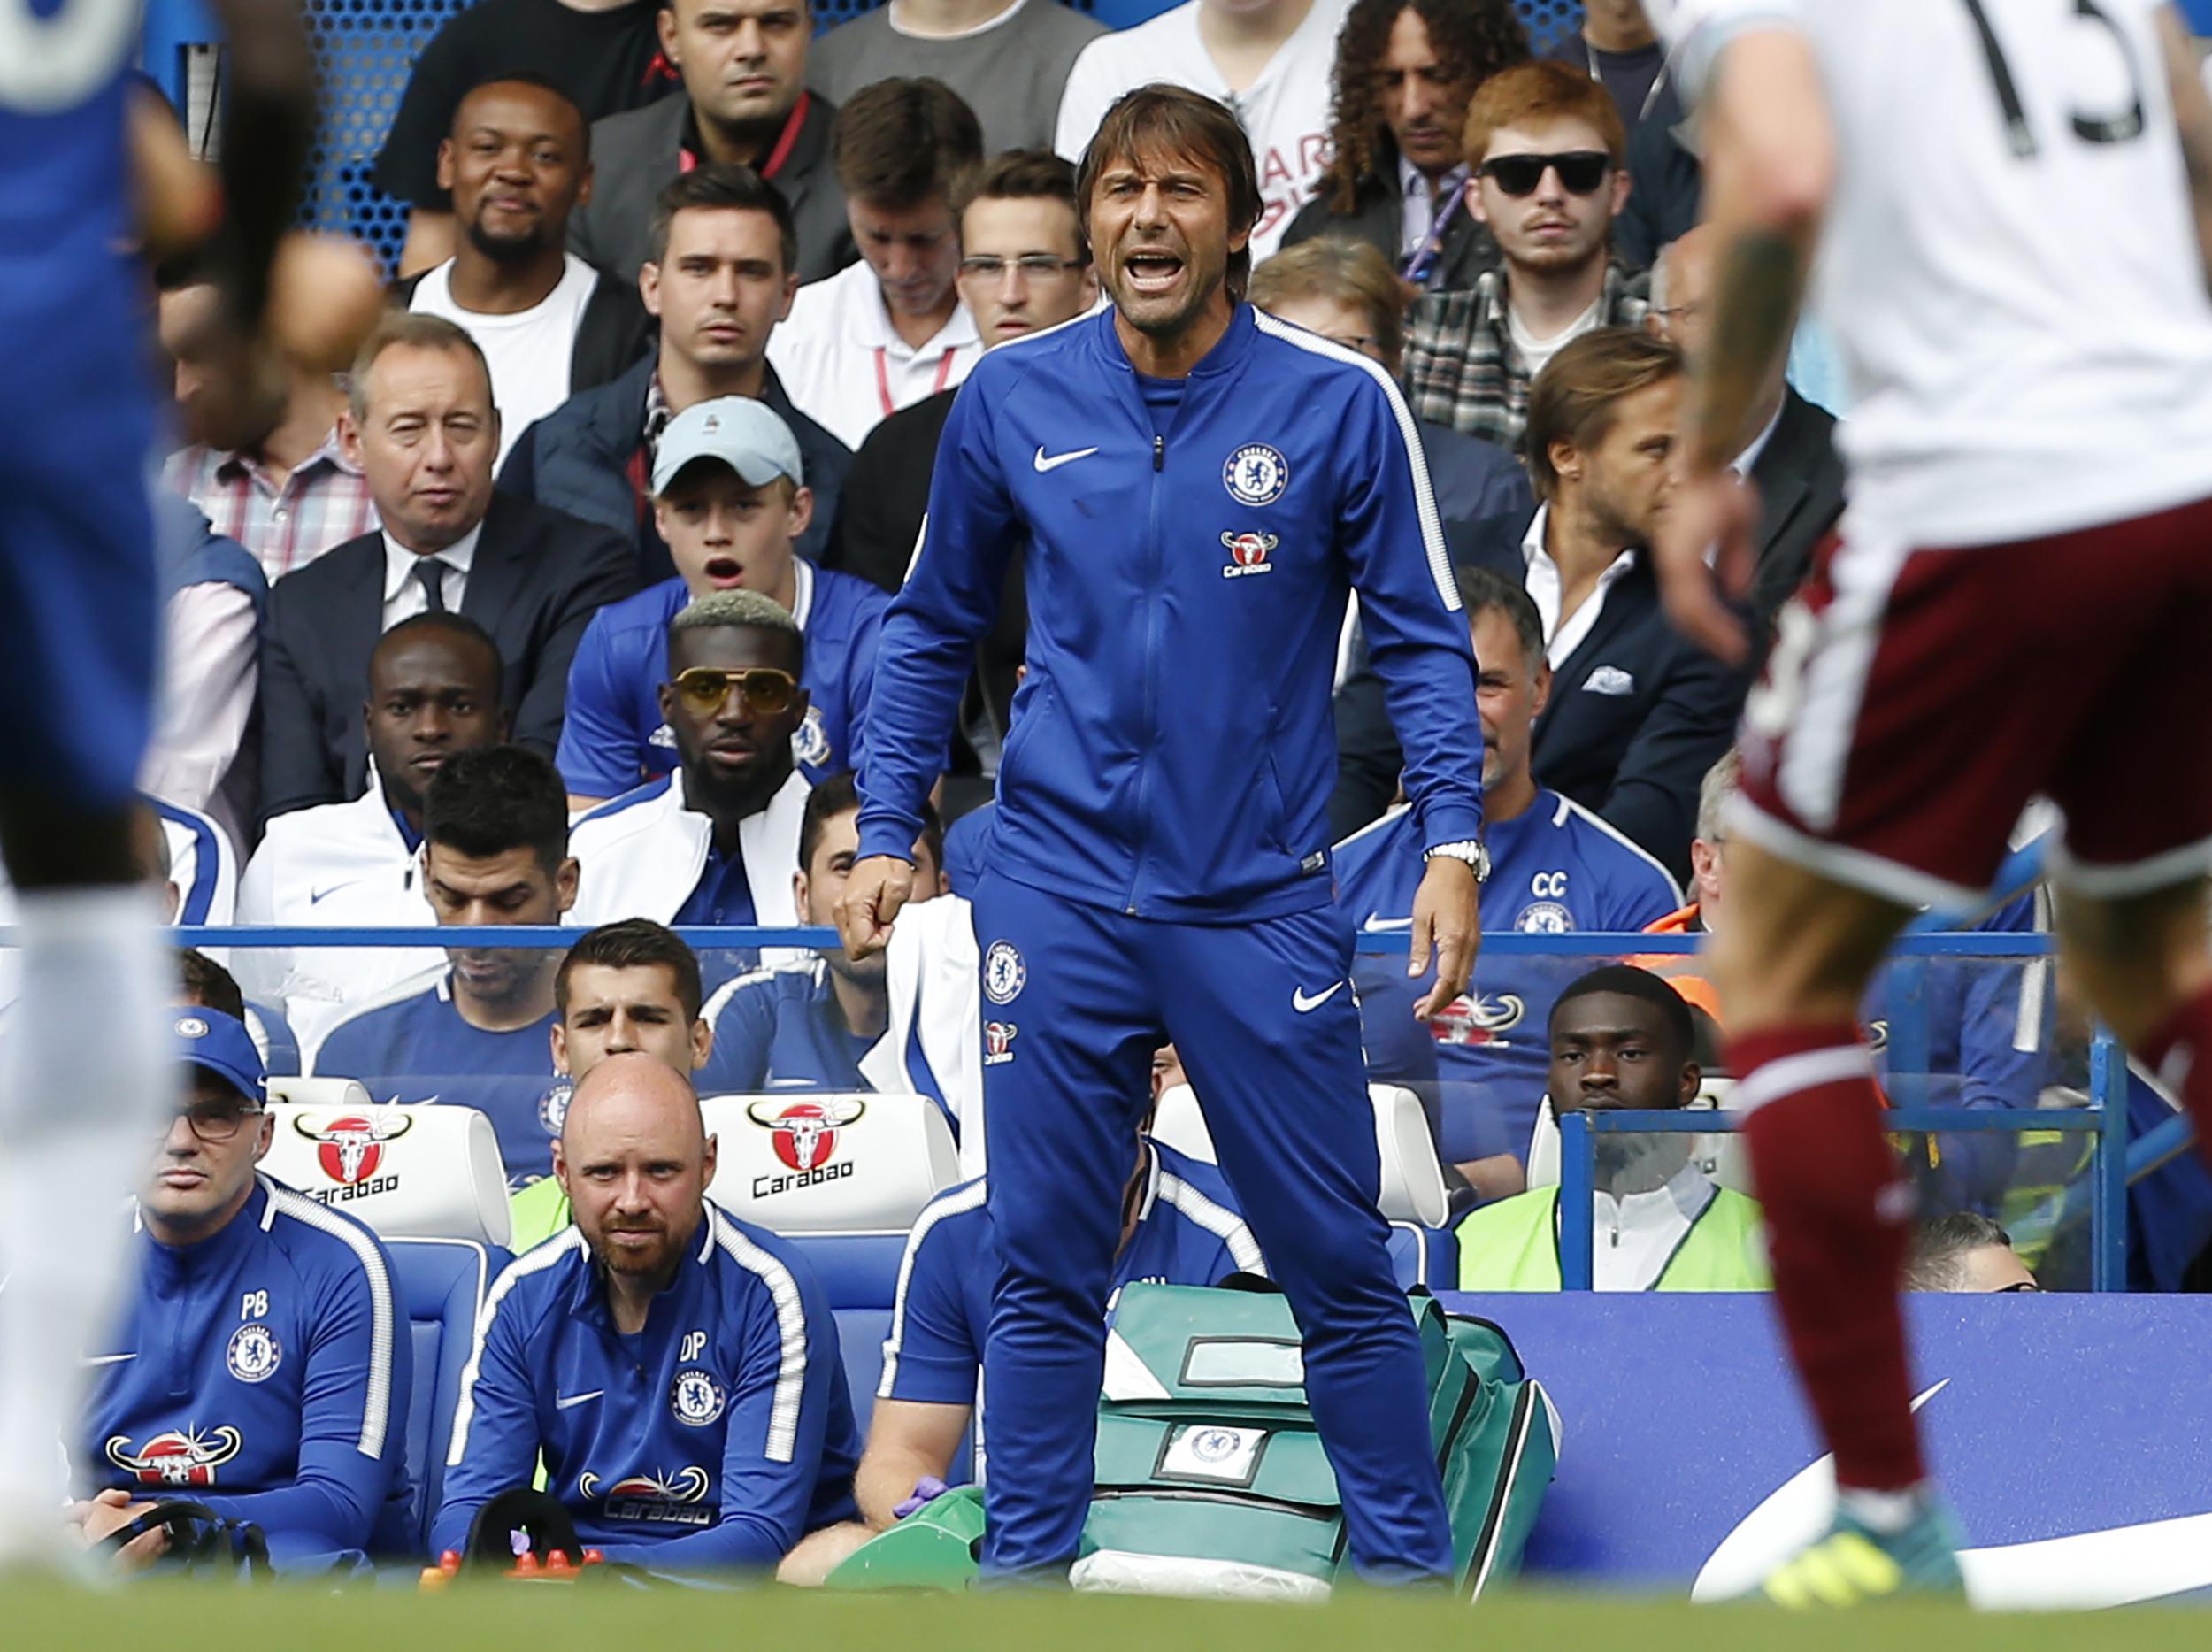 Conte cut a frustrated figure on the touchline